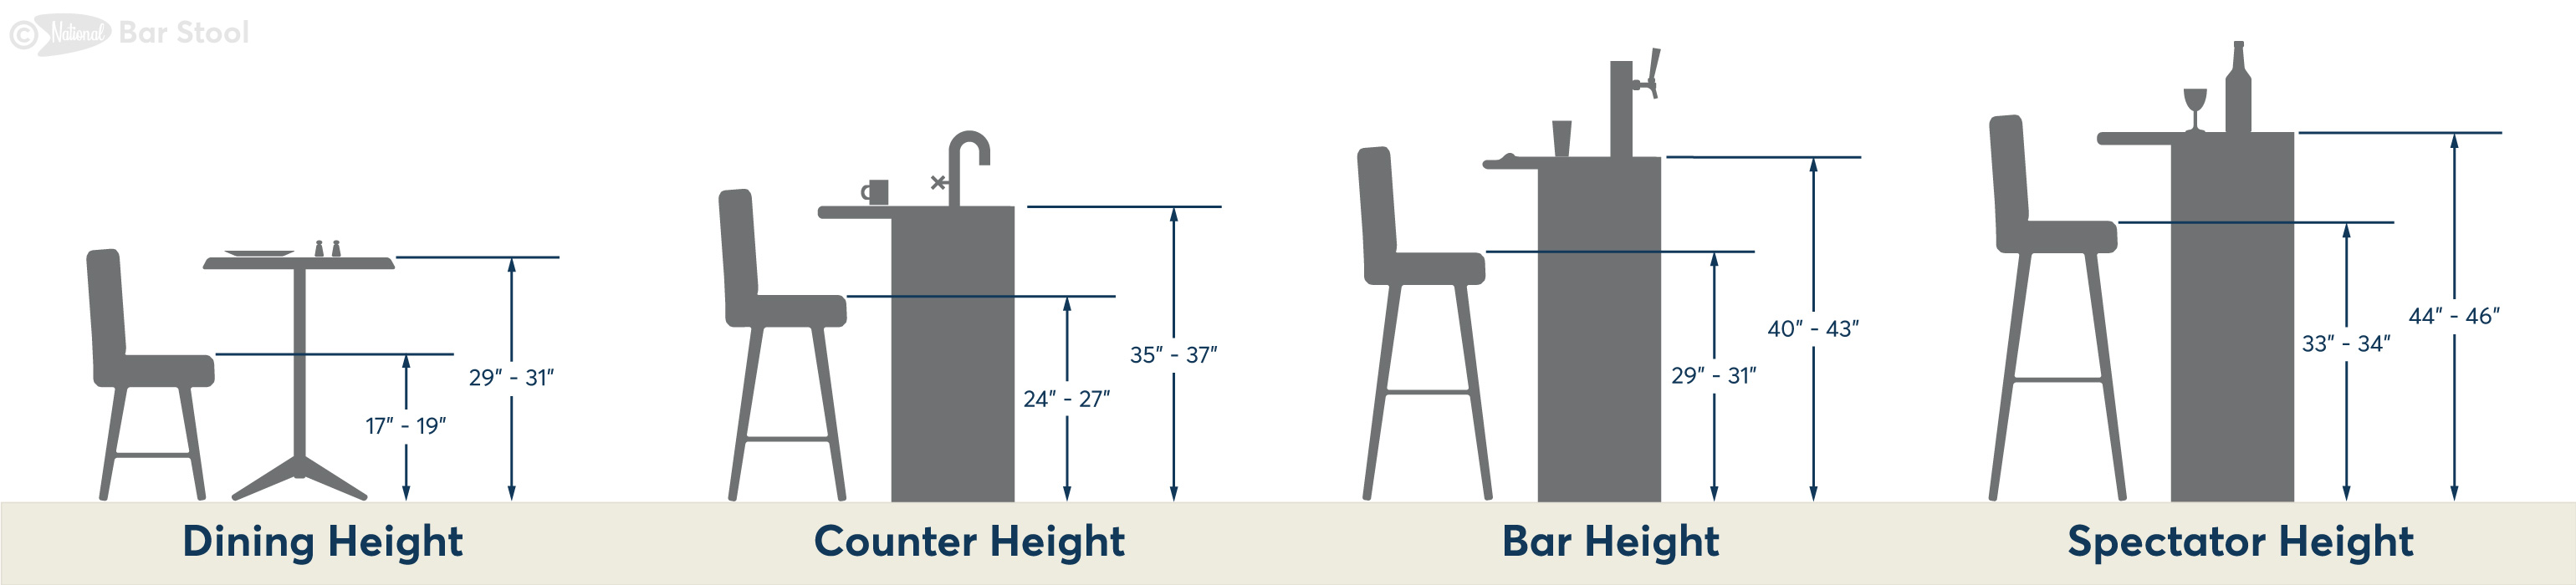 Bar Stool Ing Guide National, How To Figure Out Bar Stool Height